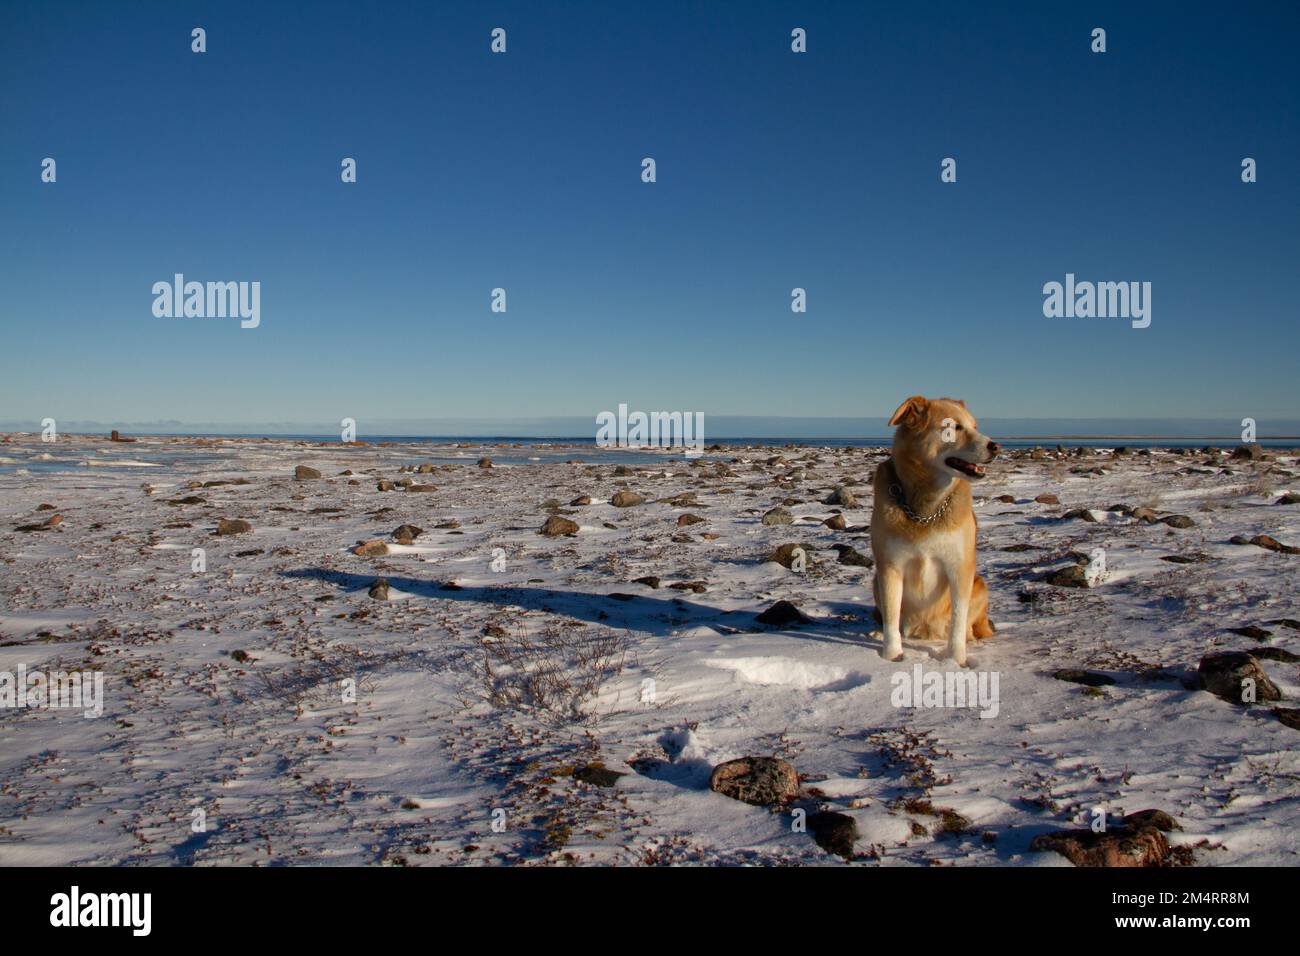 A yellow Labrador dog sitting on snow in a cold arctic landscape with clear blue skies, near Arviat, Nunavut Canada Stock Photo